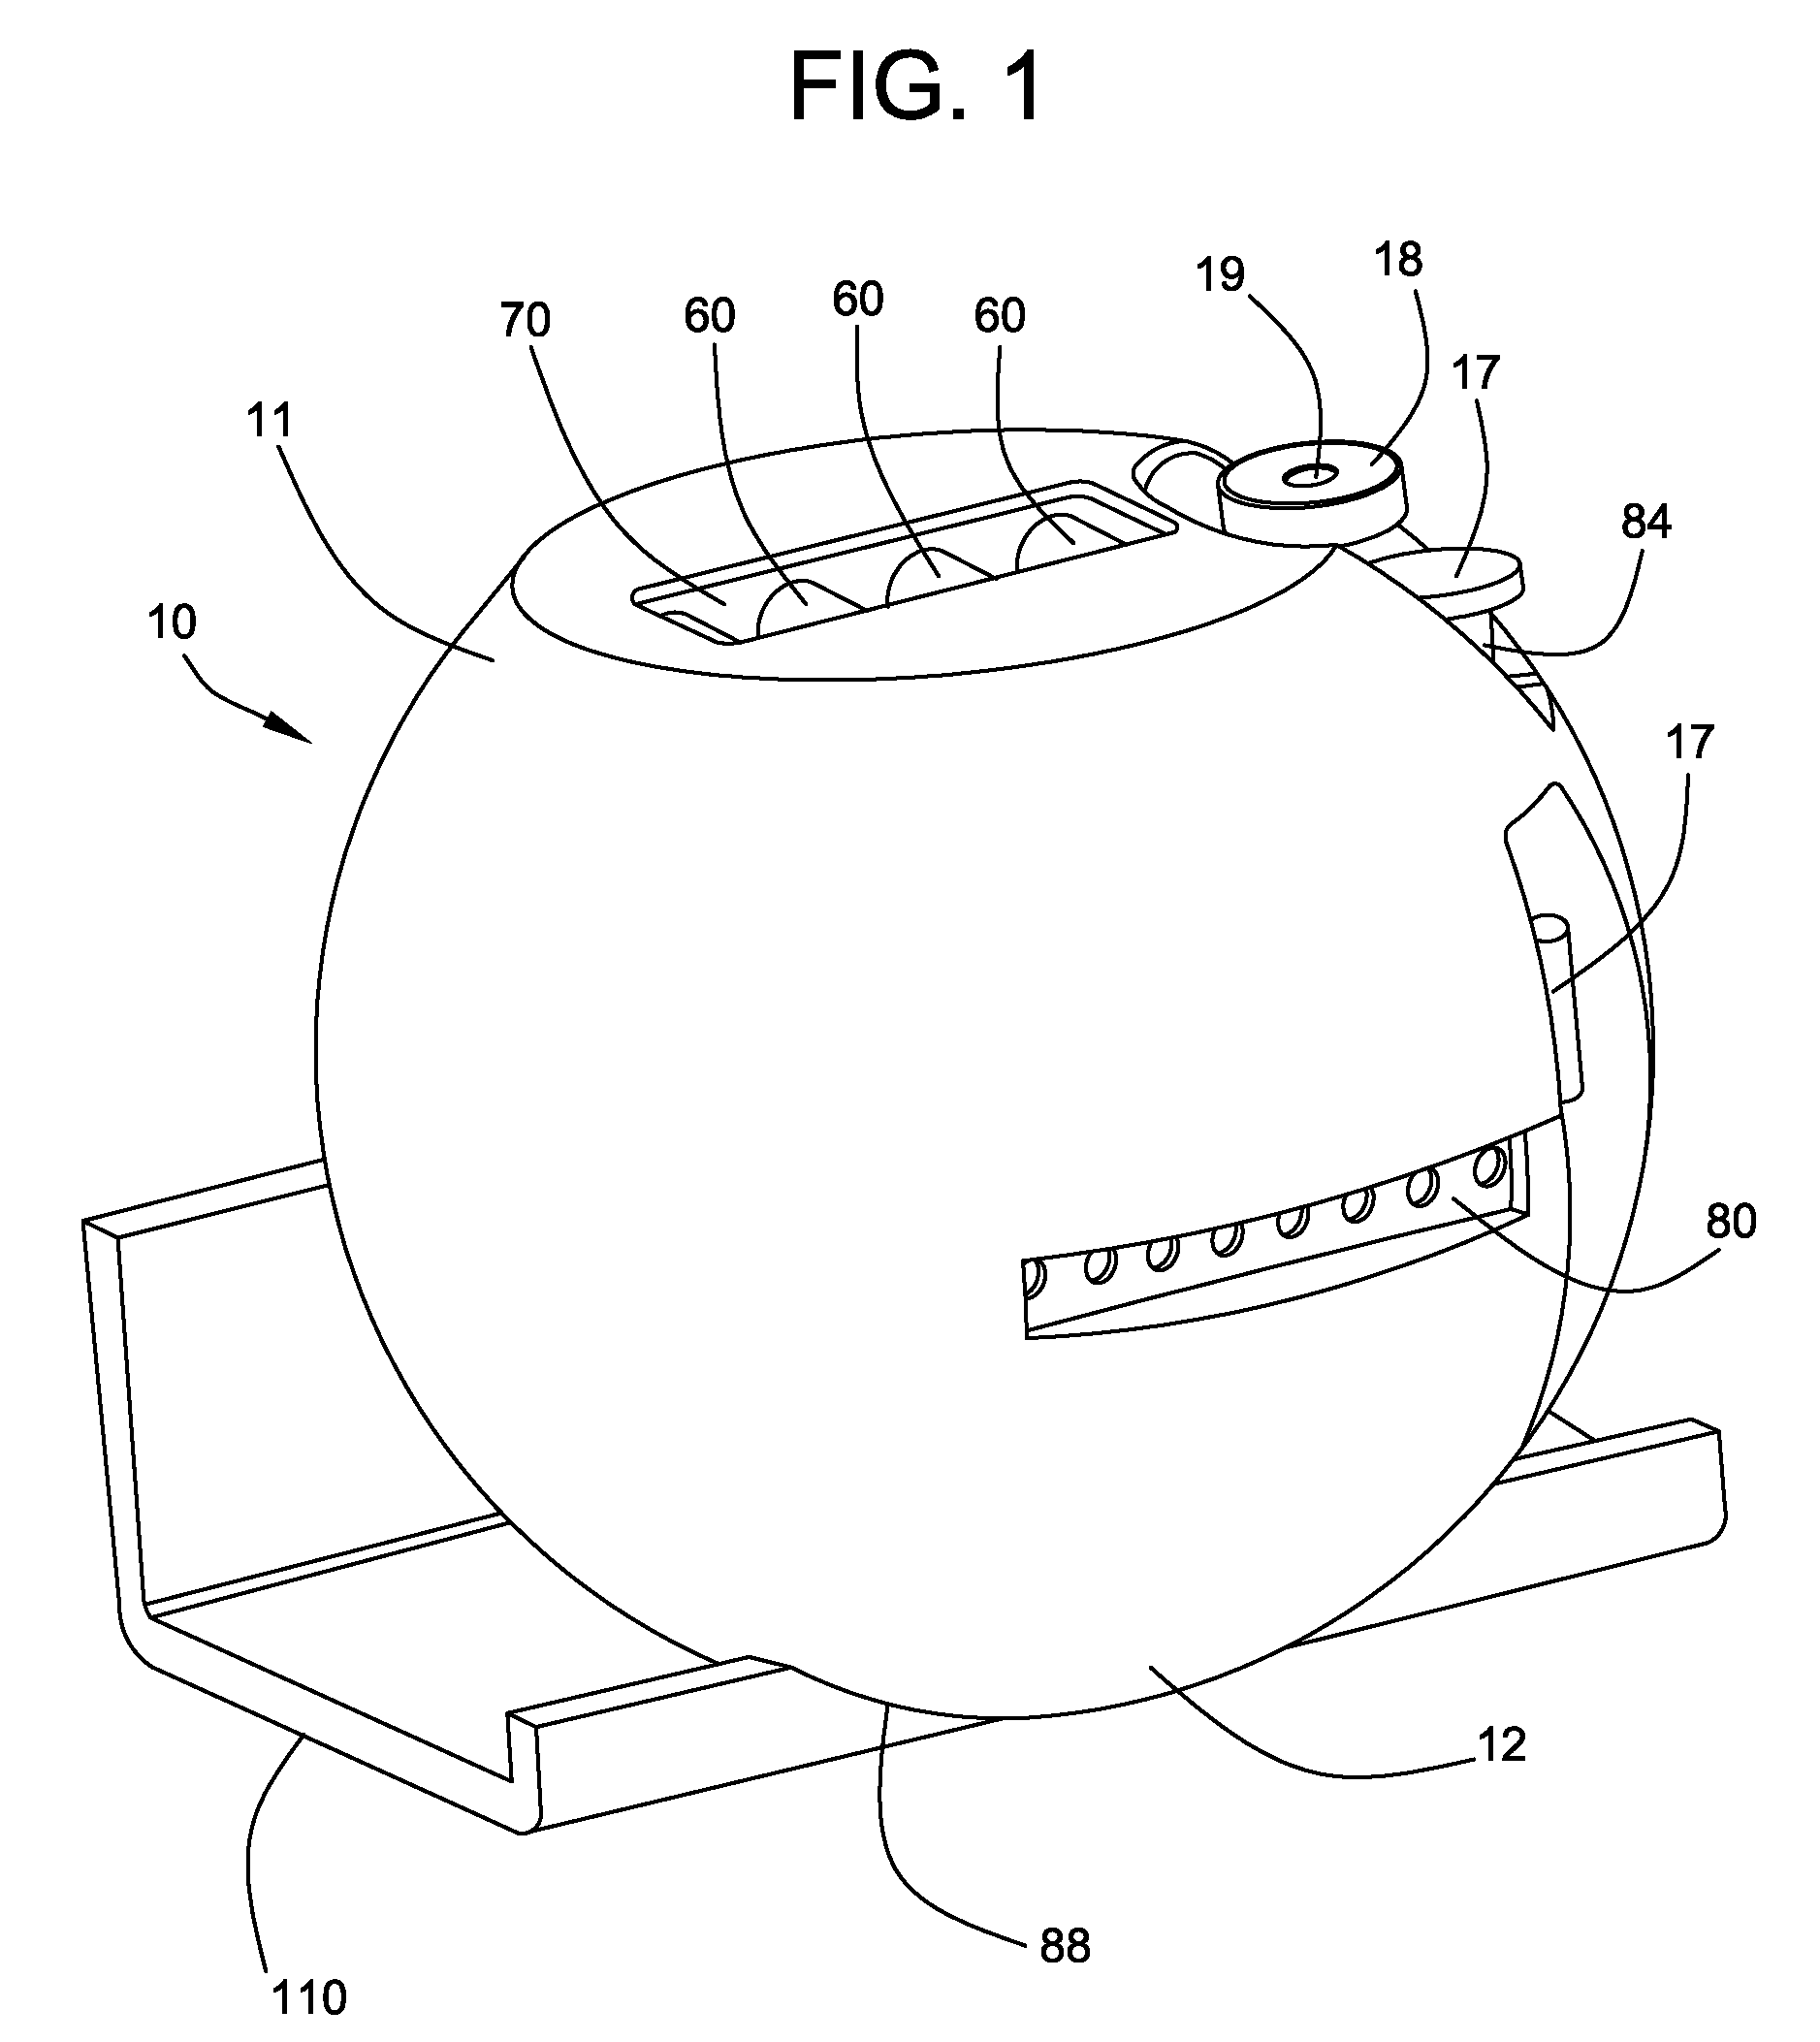 Device and method for automating microbiology processes